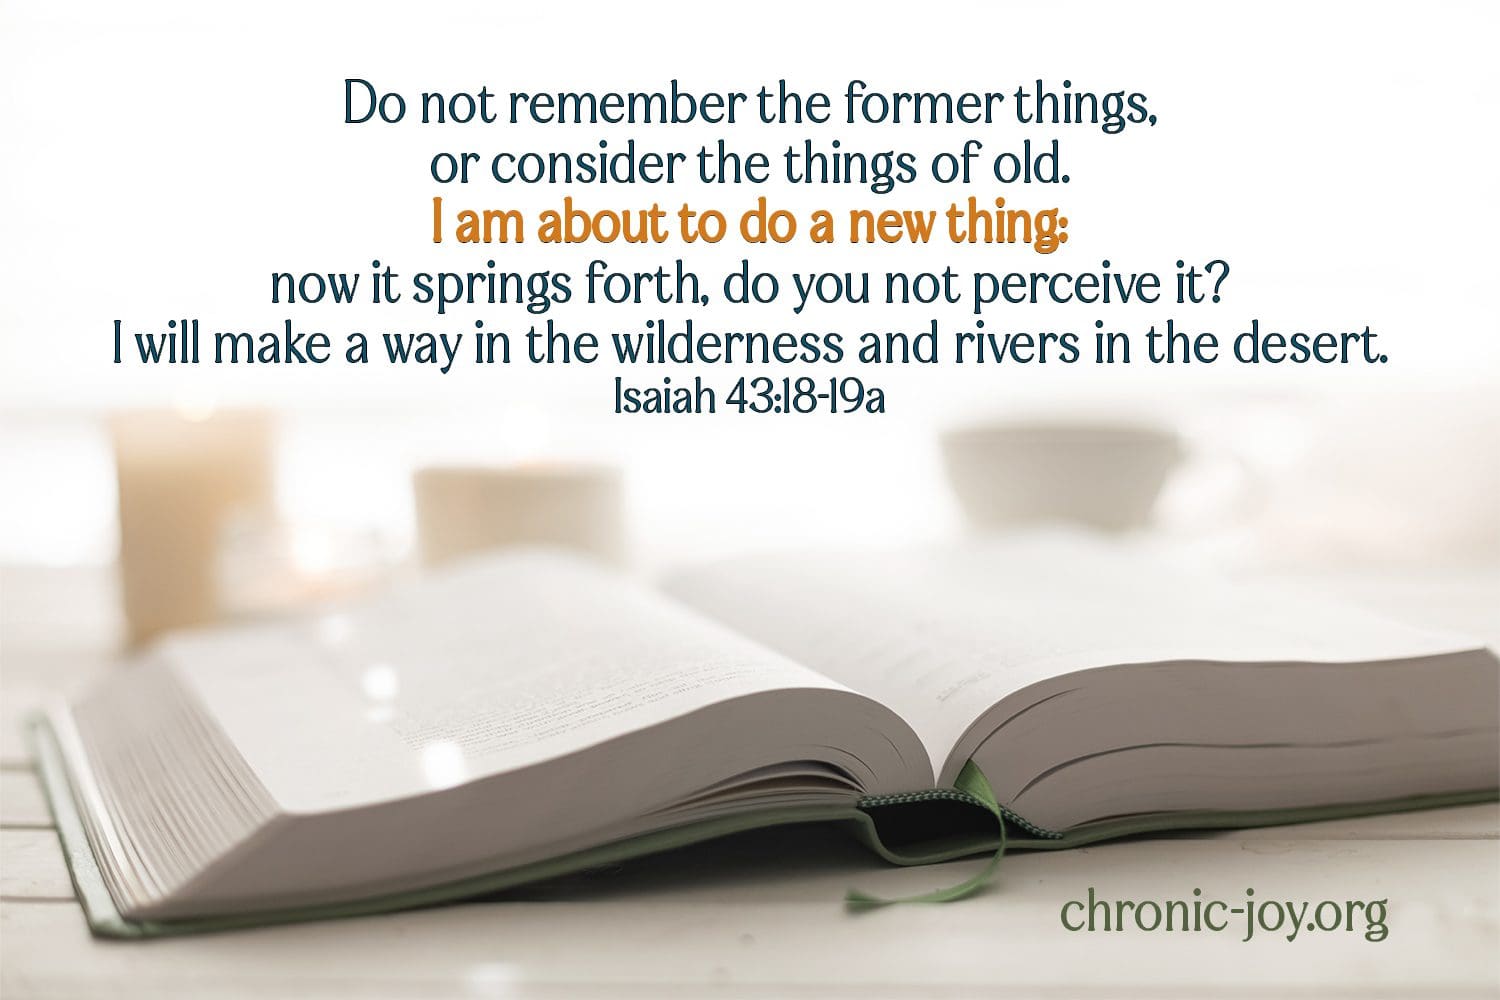 "Do not remember the former things, or consider the things of old. I am about to do a new thing: now it springs forth, do you not perceive it? I will make a way in the wilderness, and rivers in the desert." Isaiah 43:18-19